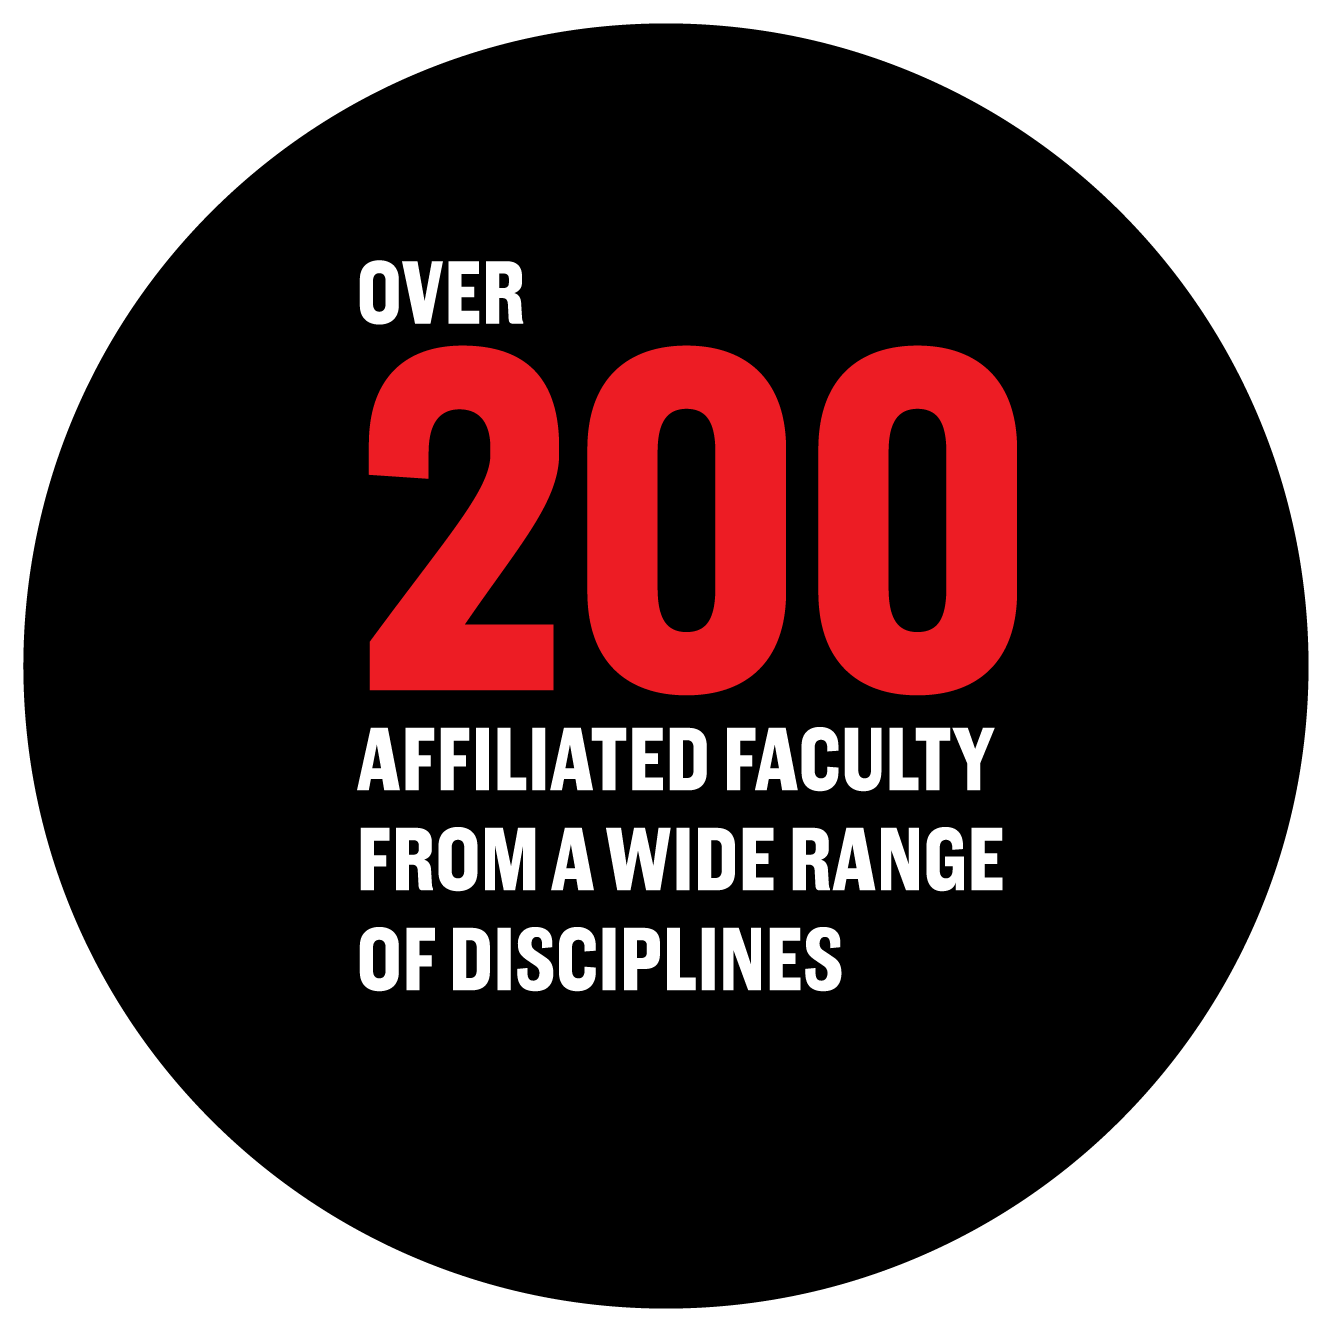 Over 200 affiliated faculty from a wide range of disciplines.